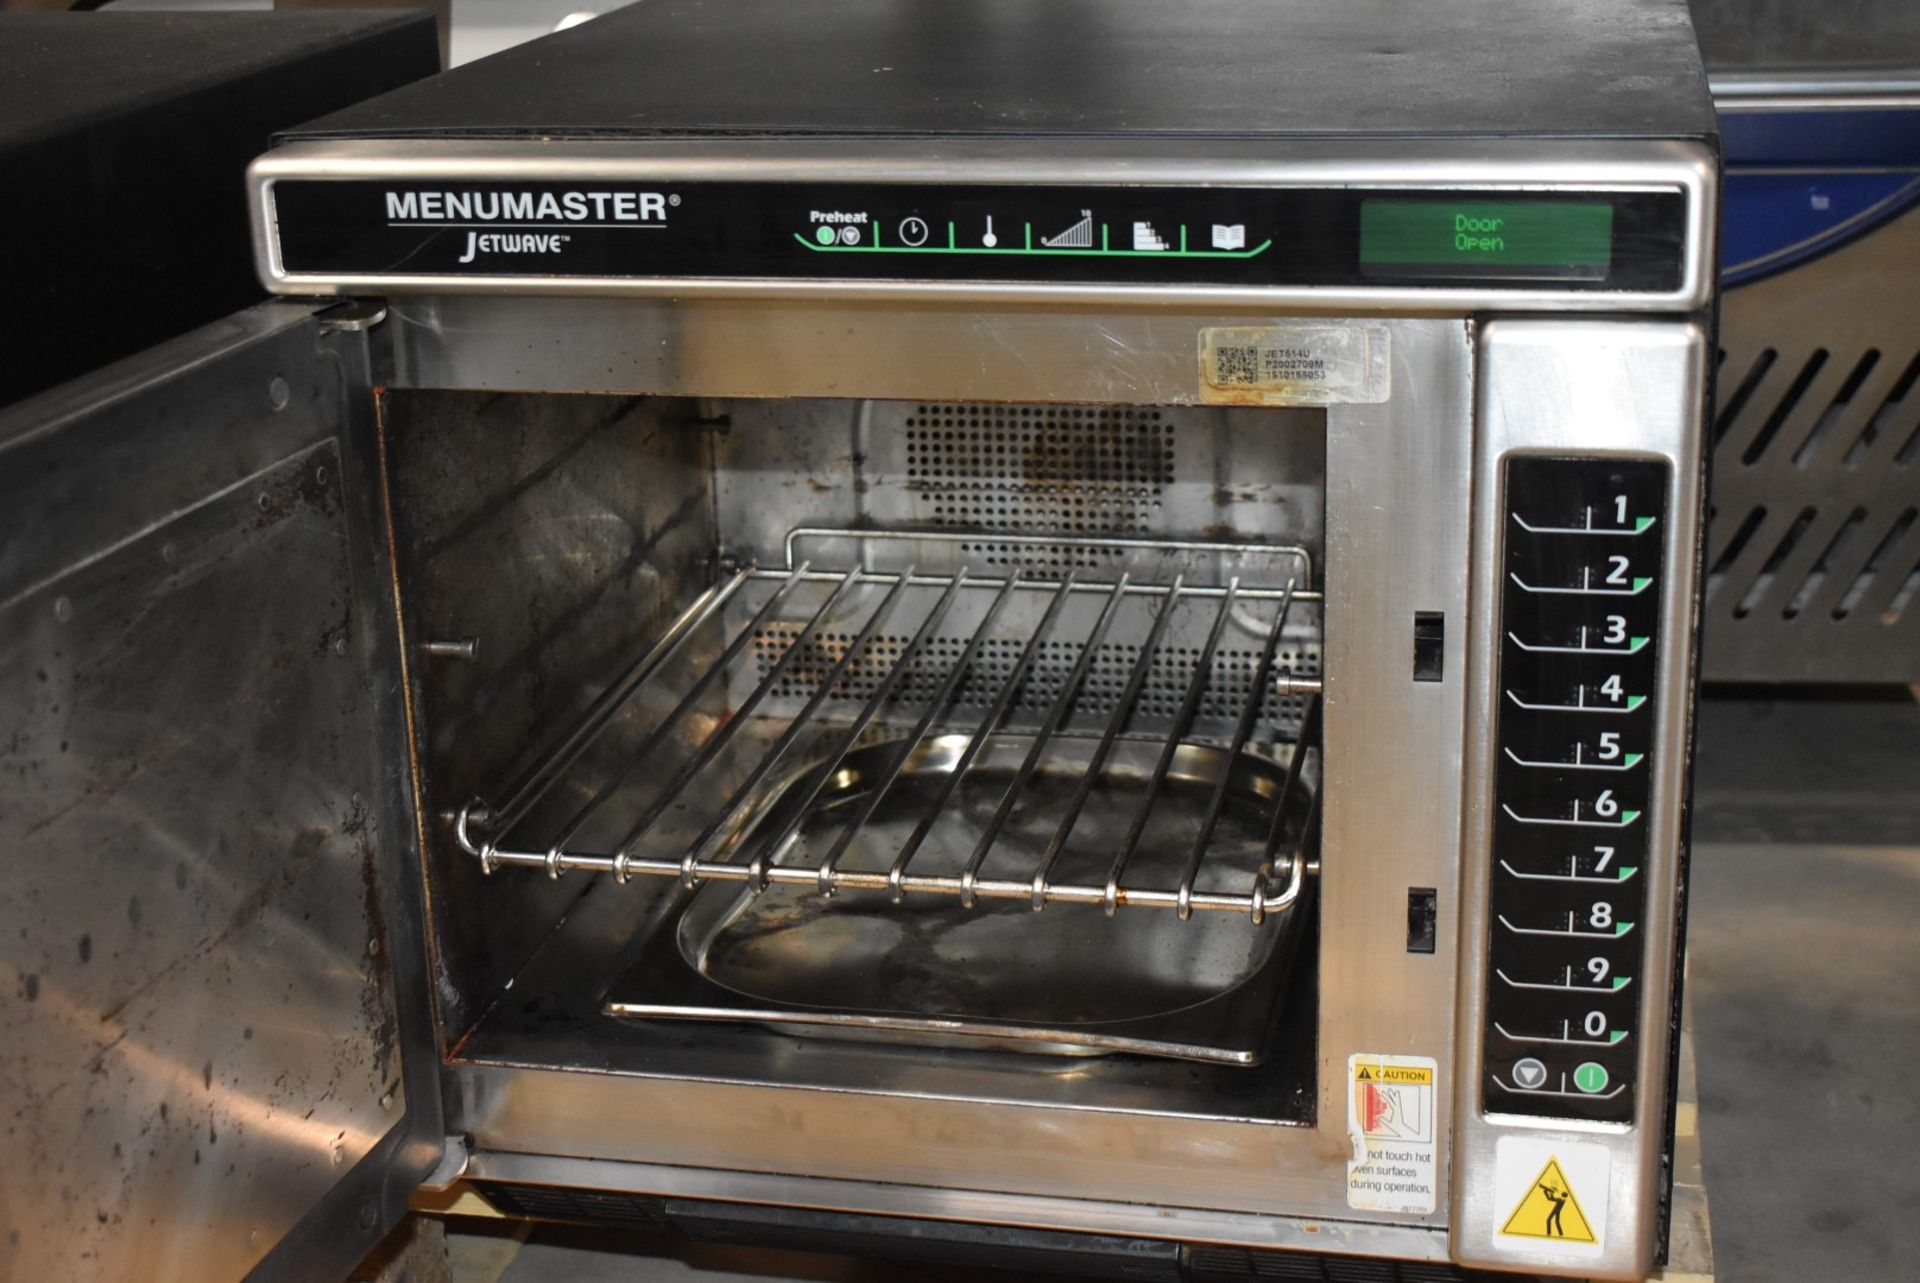 1 x Menumaster Jetwave JET514U High Speed Combination Microwave Oven - RRP £2,400 - Recently Remove - Image 6 of 11